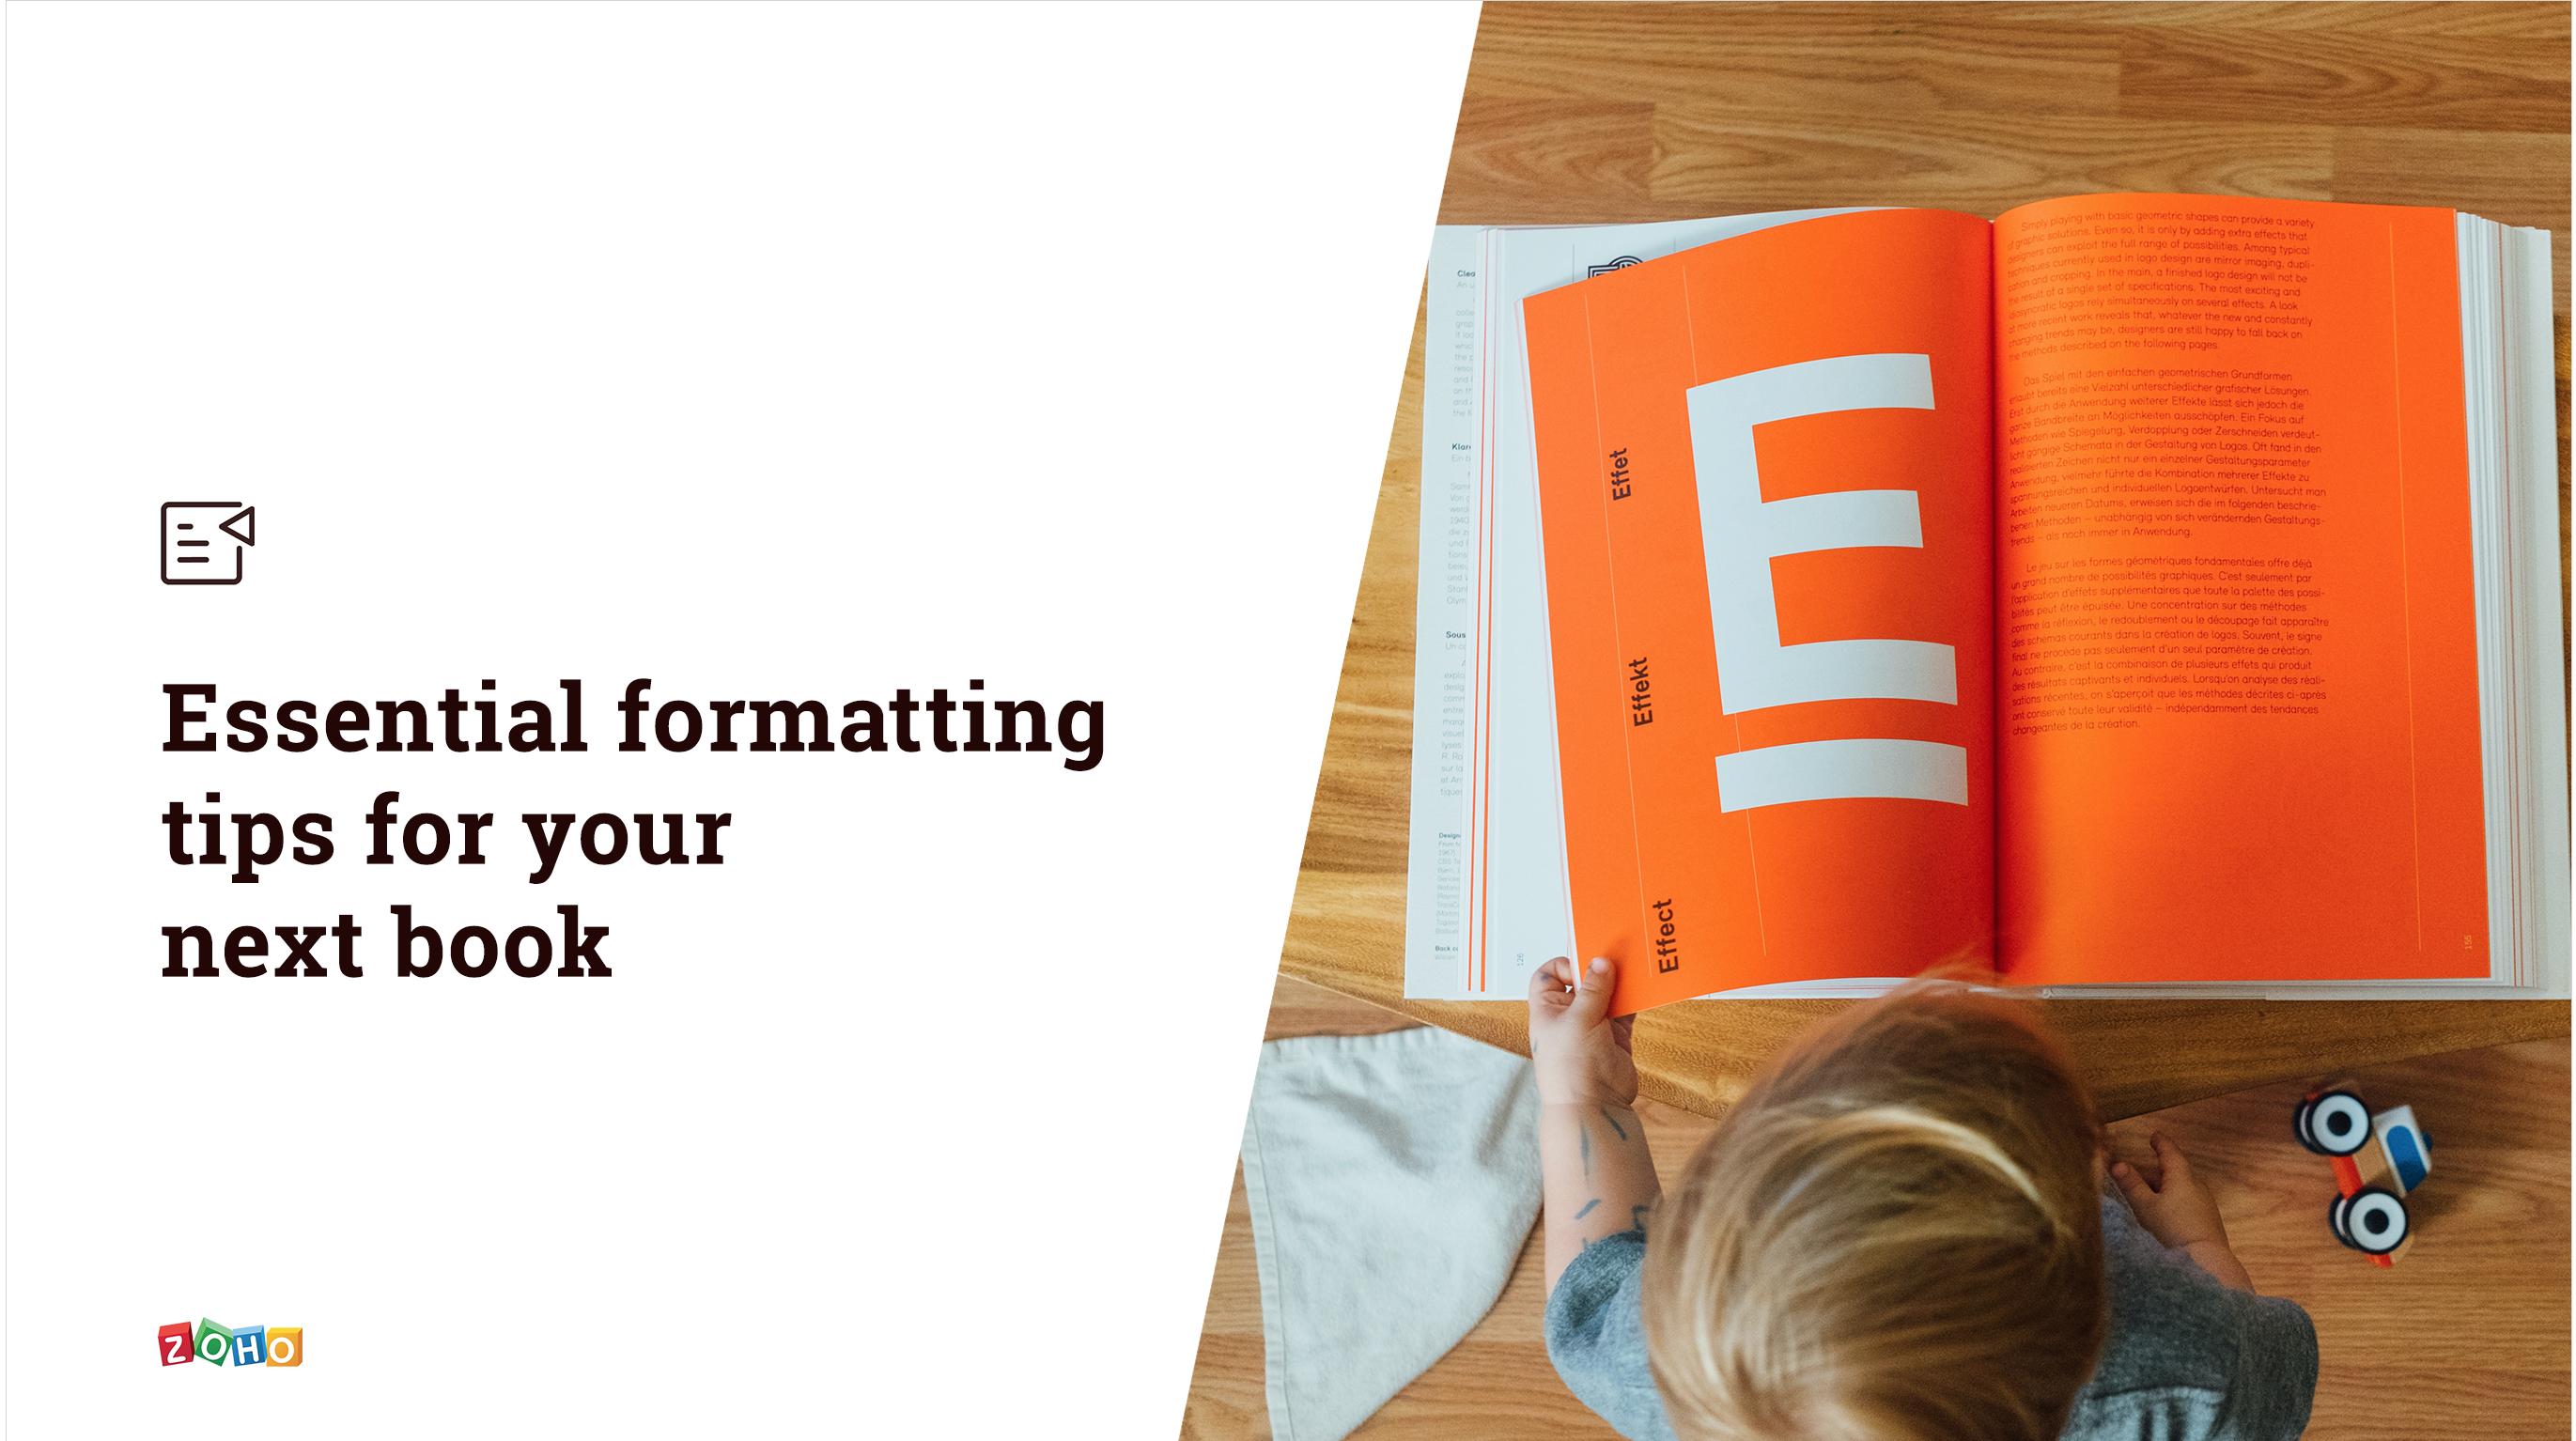 11 tips to keep in mind while formatting your book